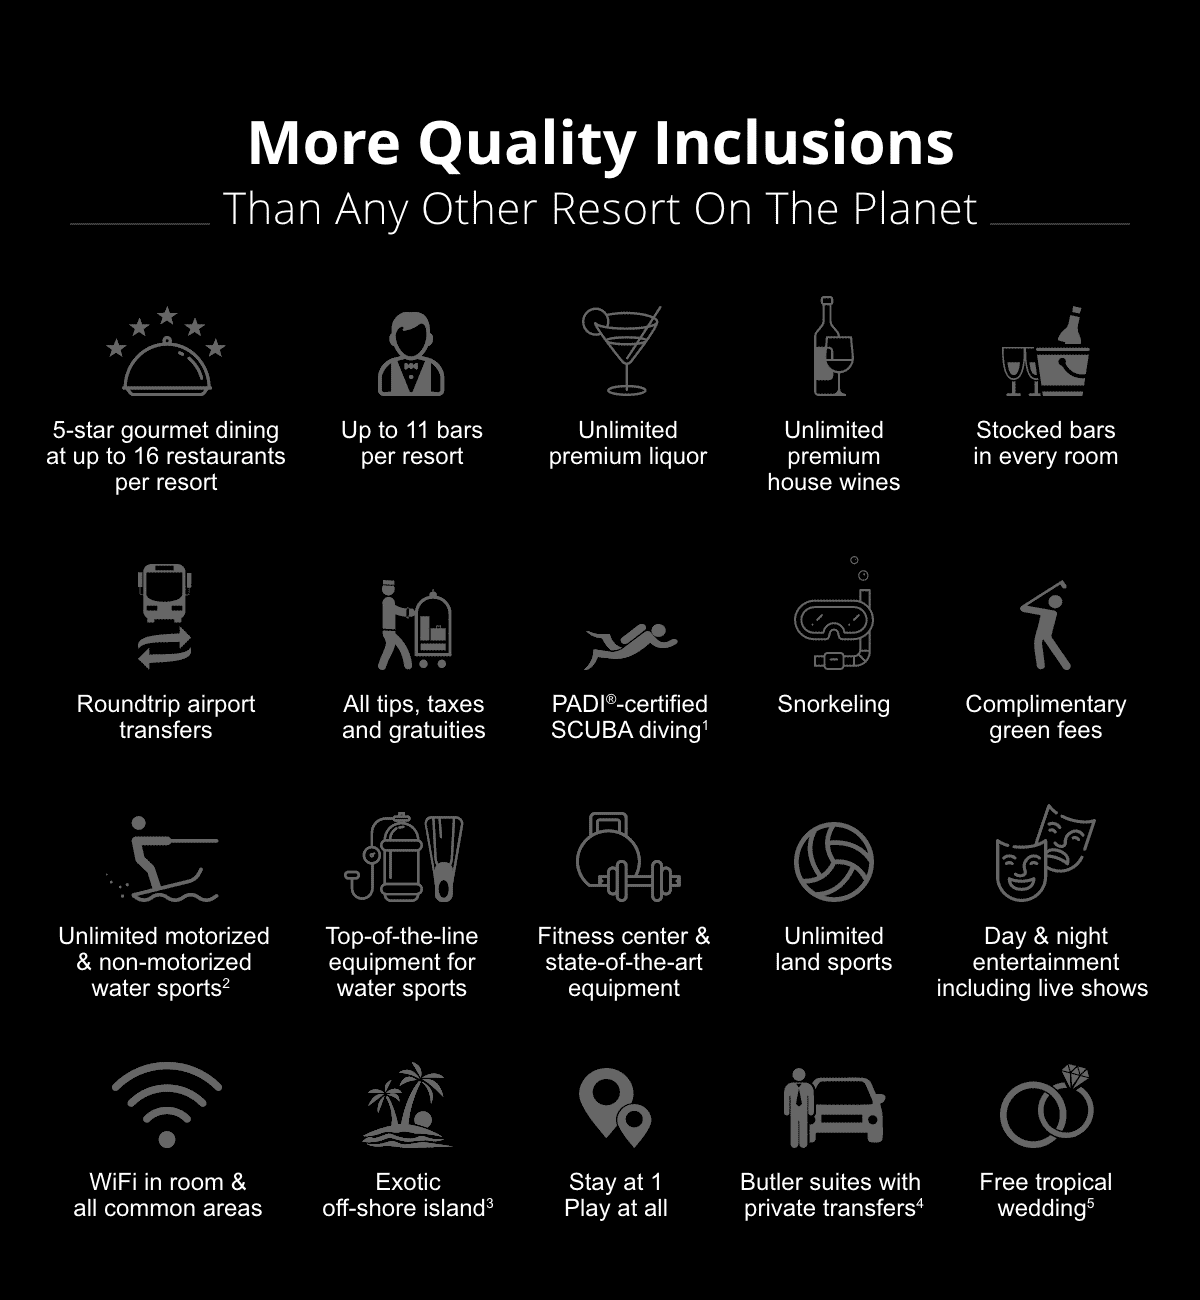 More Quality Inclusion